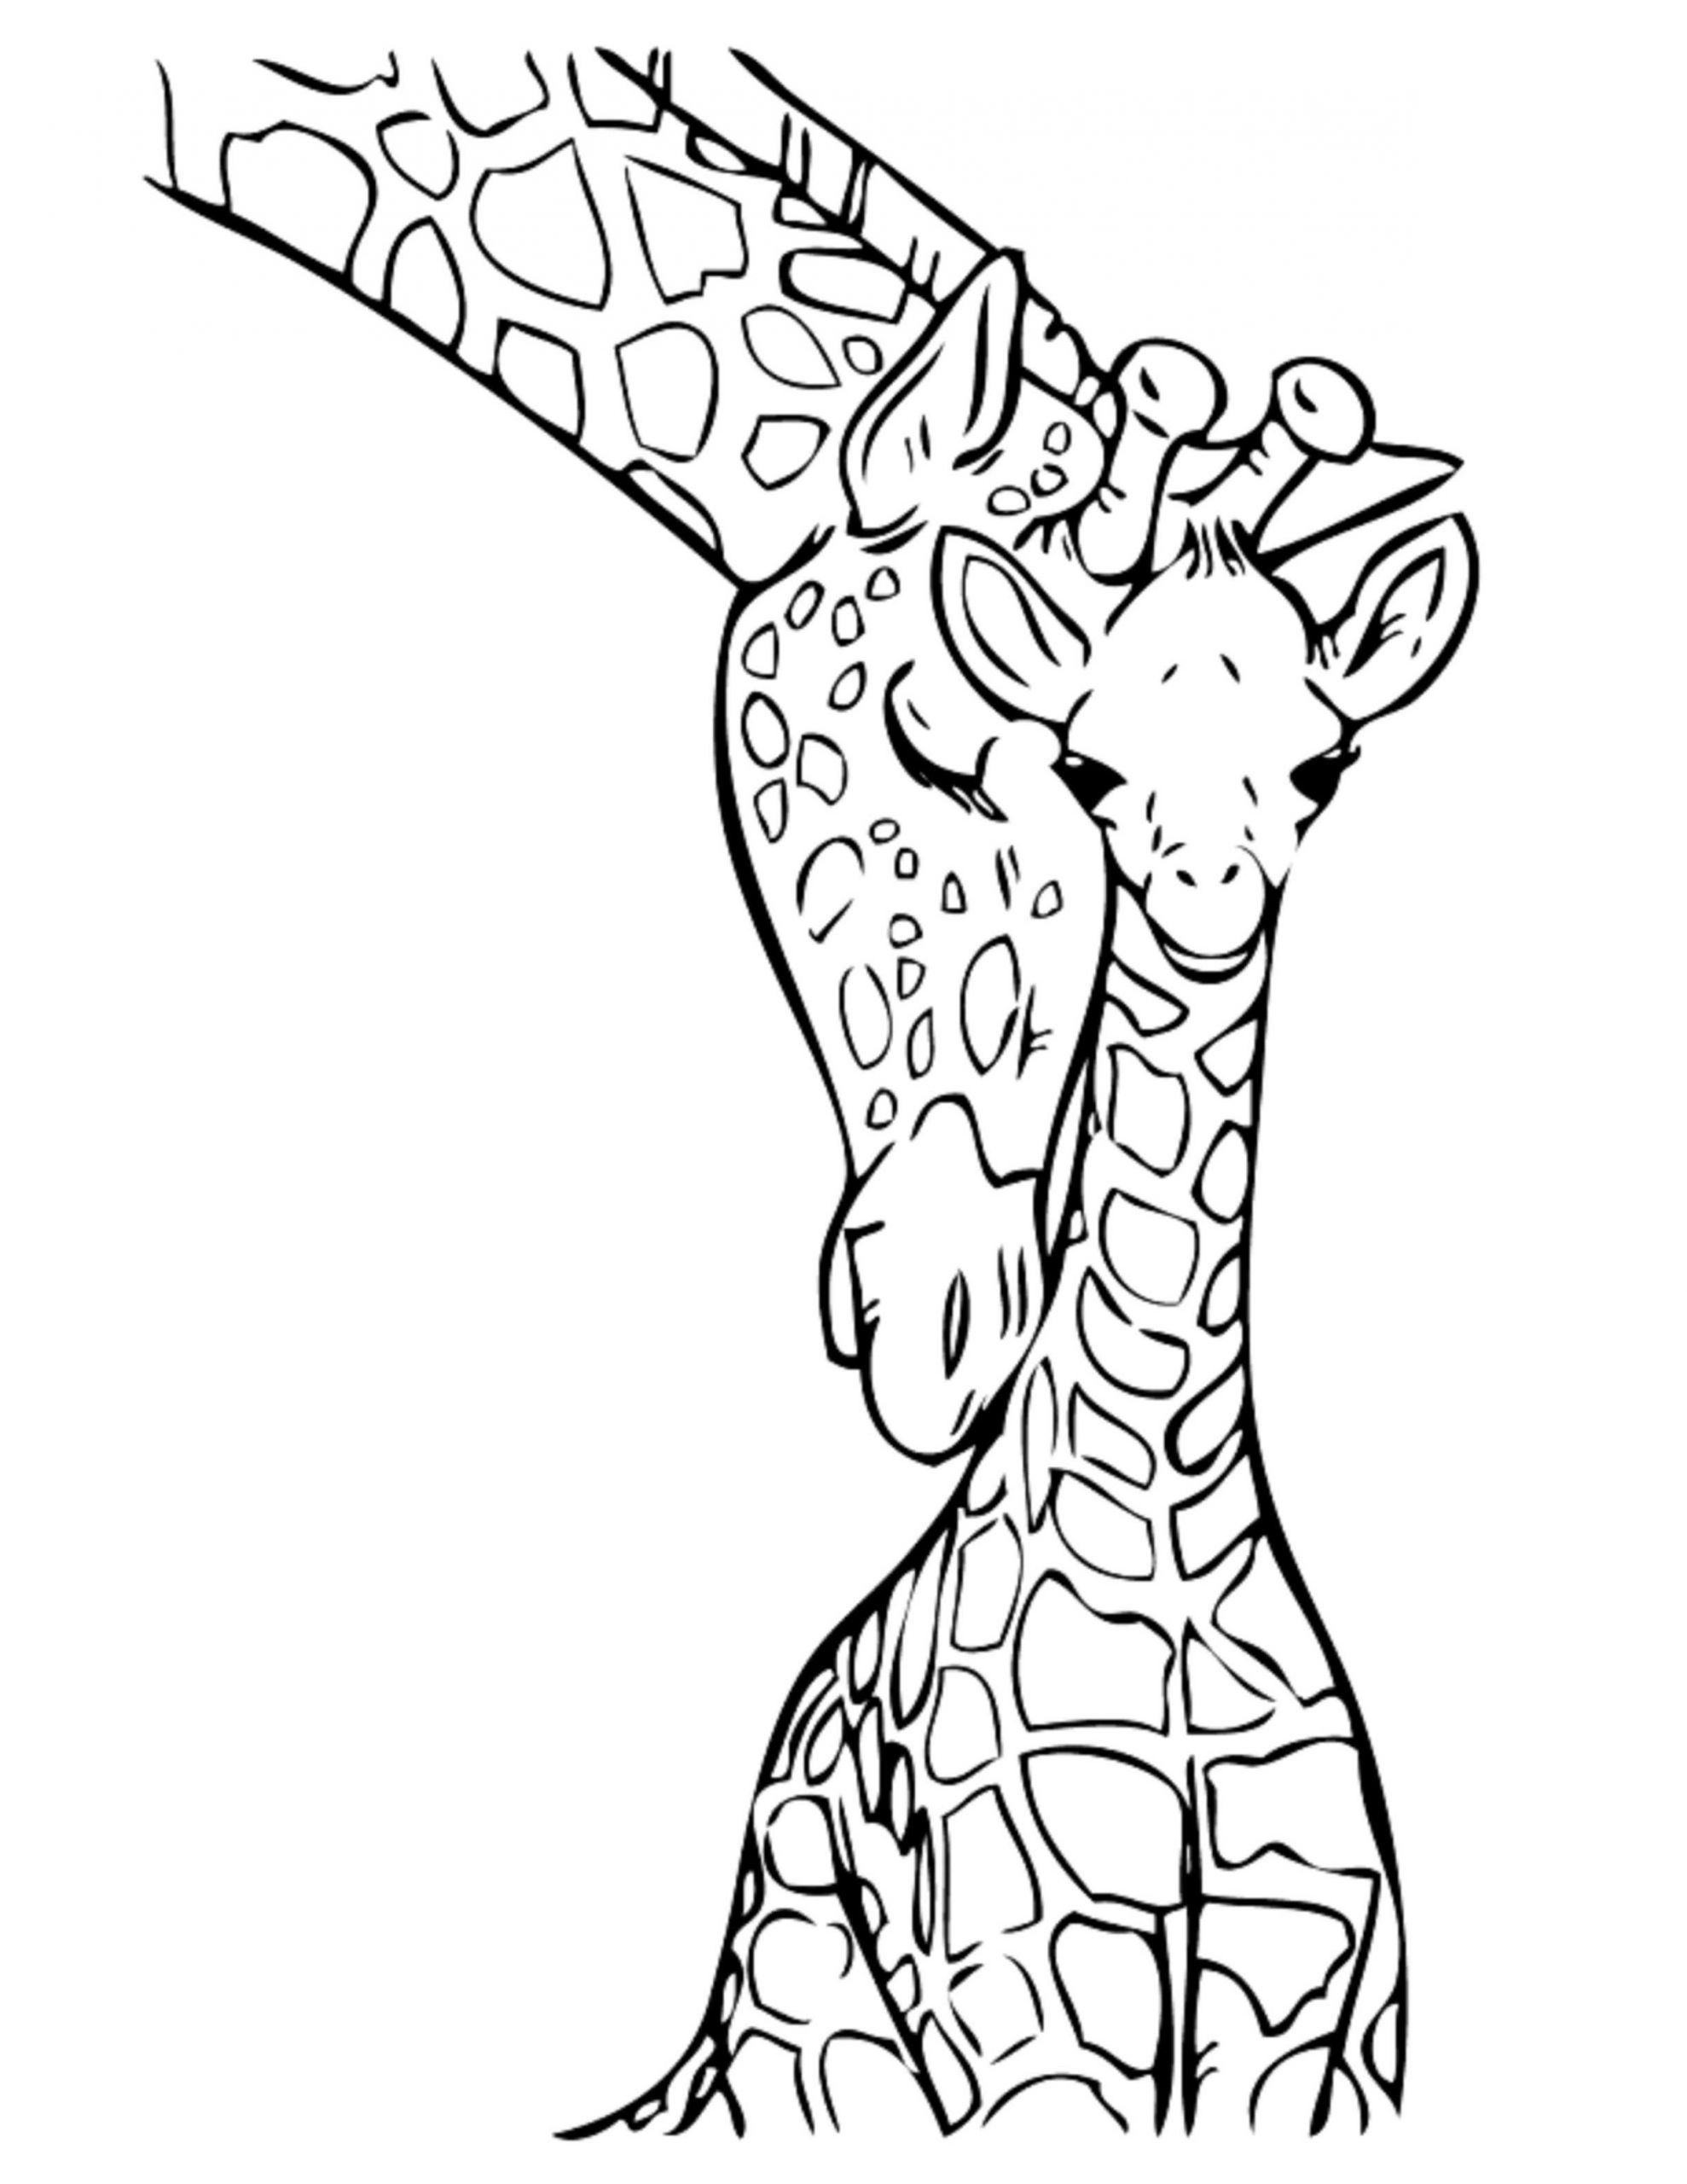 Giraffe Coloring Pages Printable
 giraffe coloring pages